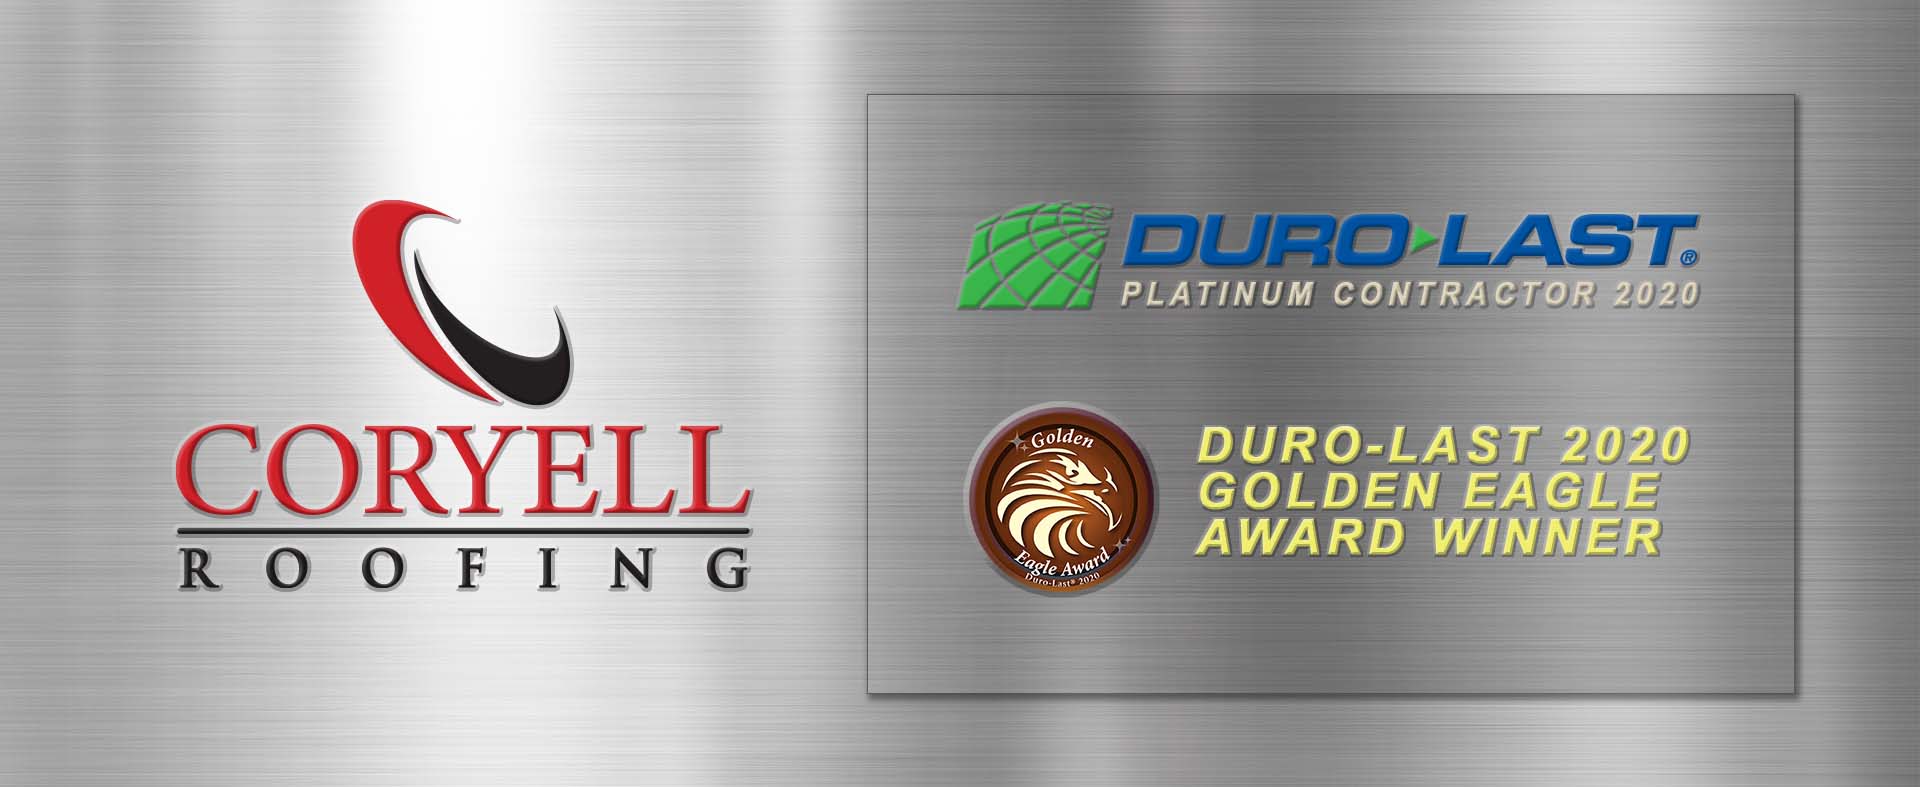 Award Winning Coryell Roofing Goes “Above and Beyond” in 2020